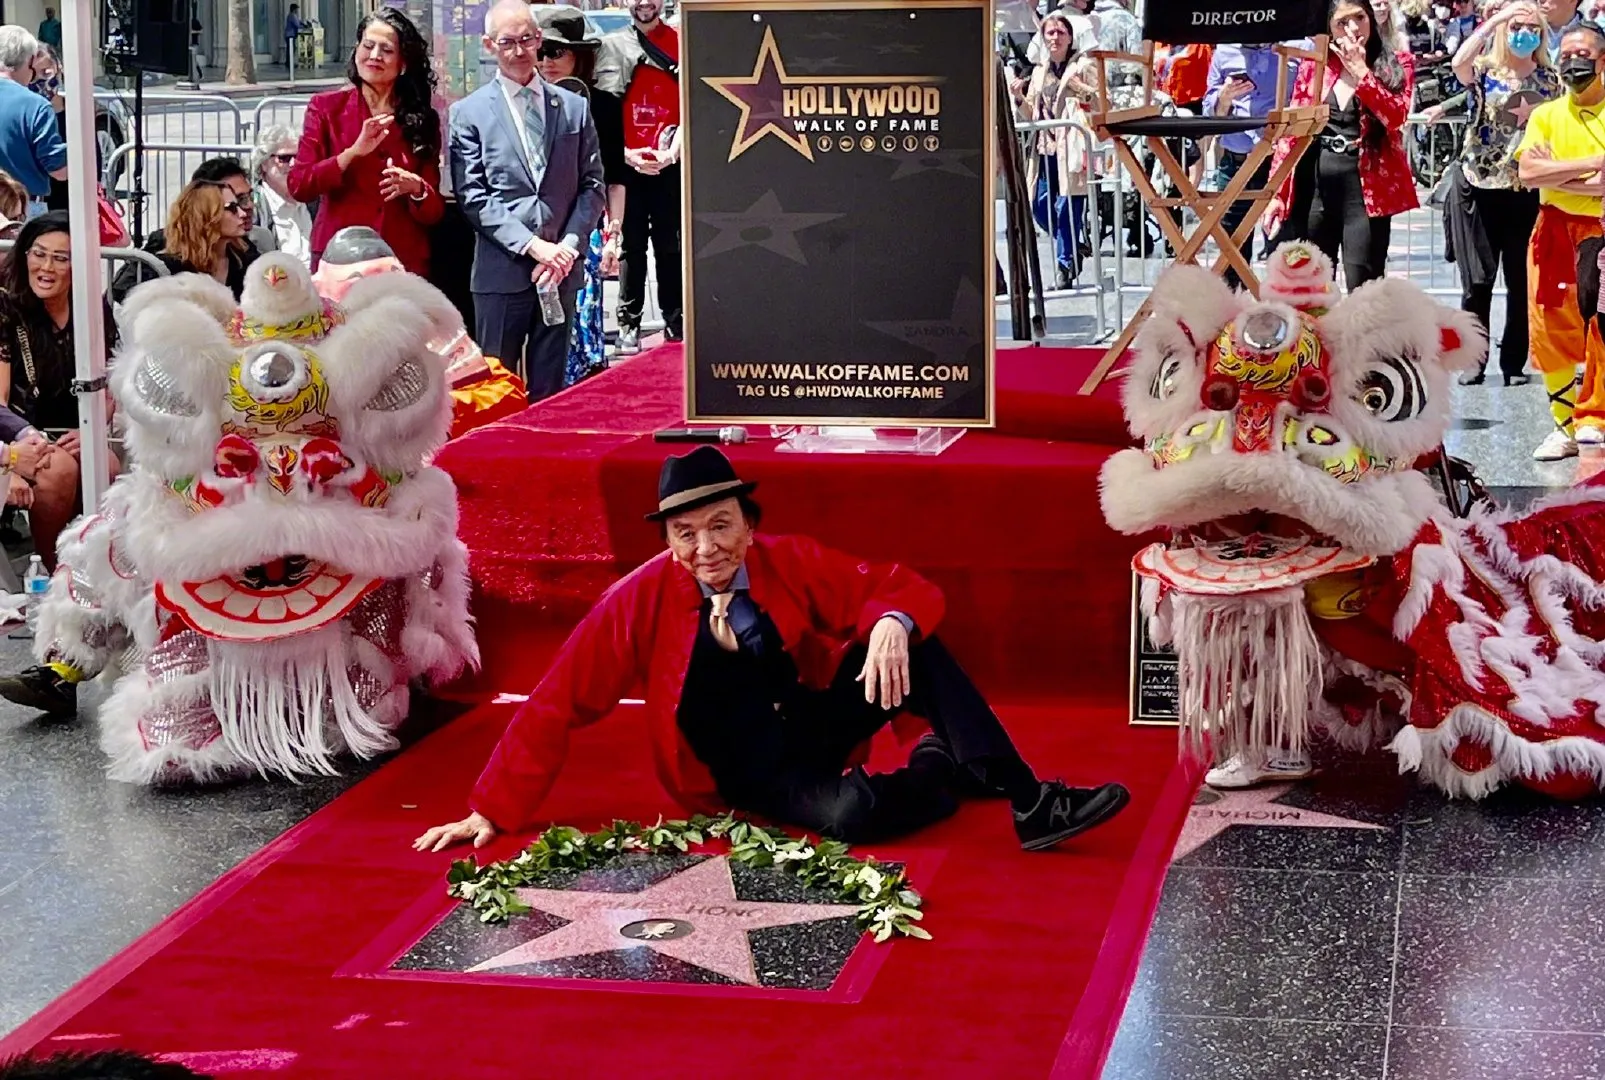 James Hong leaves his star at Walk Of Fame in Hollywood